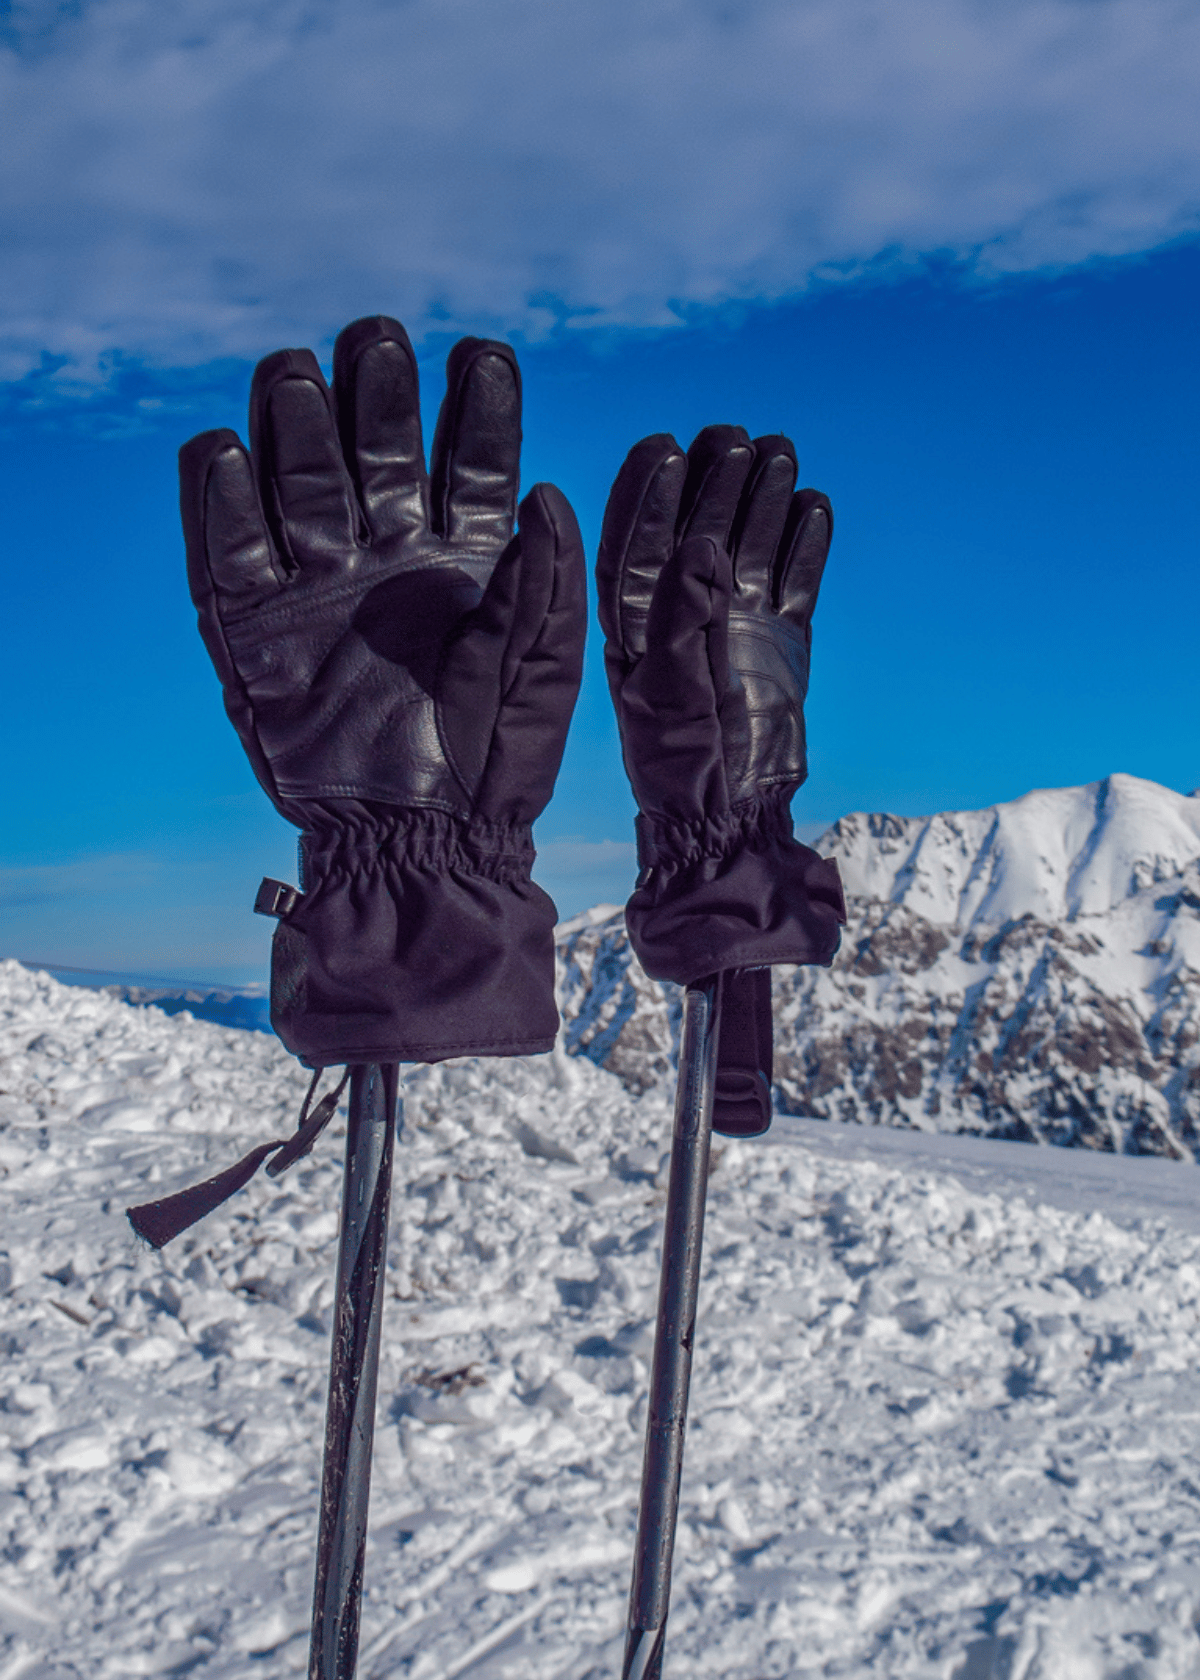 Skiing in 2023? Here are the Best Ski Gloves for Men